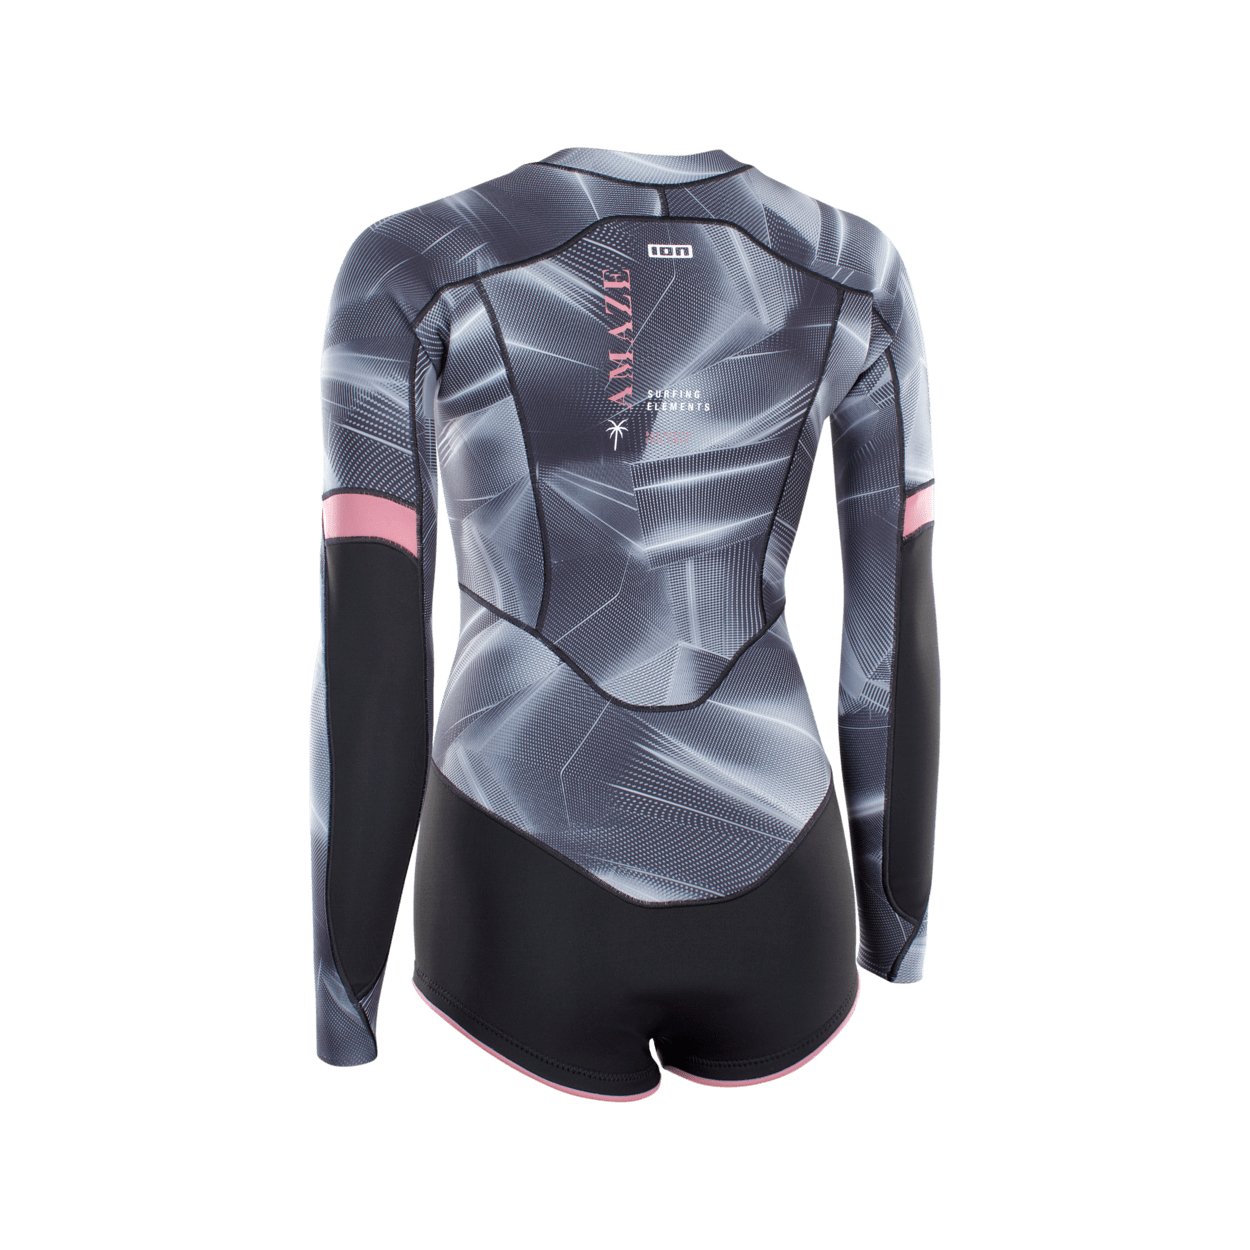 ION Amaze Hot Shorty LS 1.5 FZ DL 2021 - Worthing Watersports - 9008415954629 - Wetsuits - ION Water